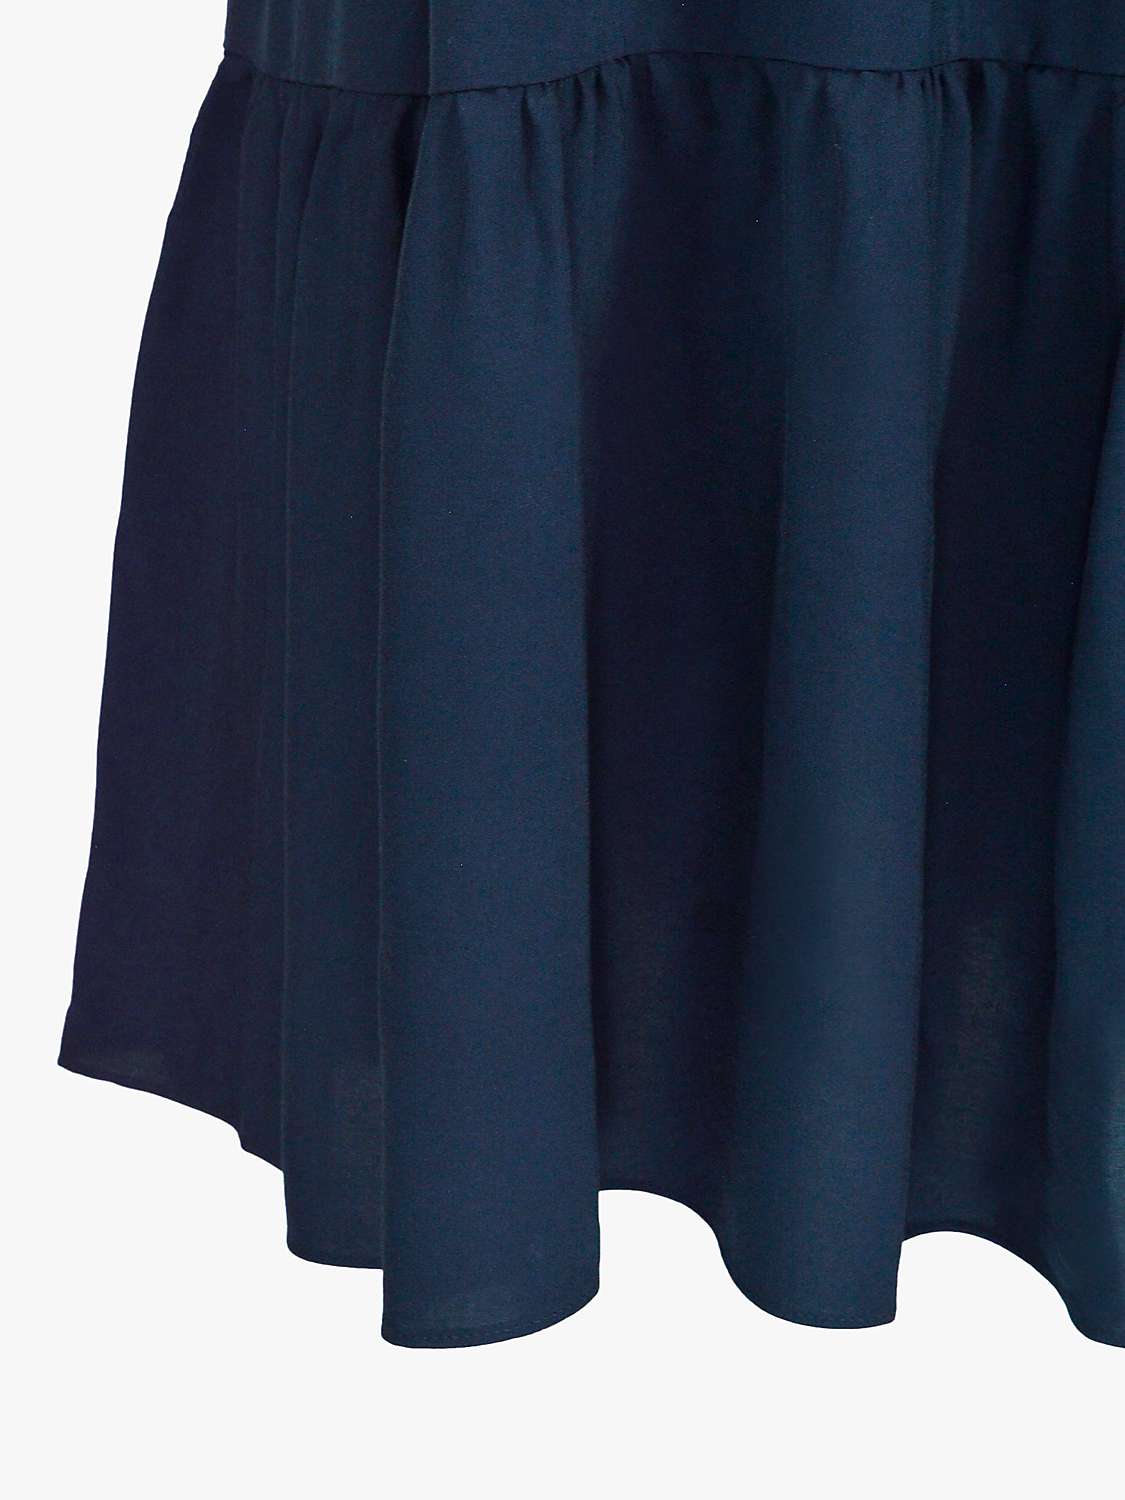 Buy Live Unlimited Tiered Midi Dress, Navy Online at johnlewis.com